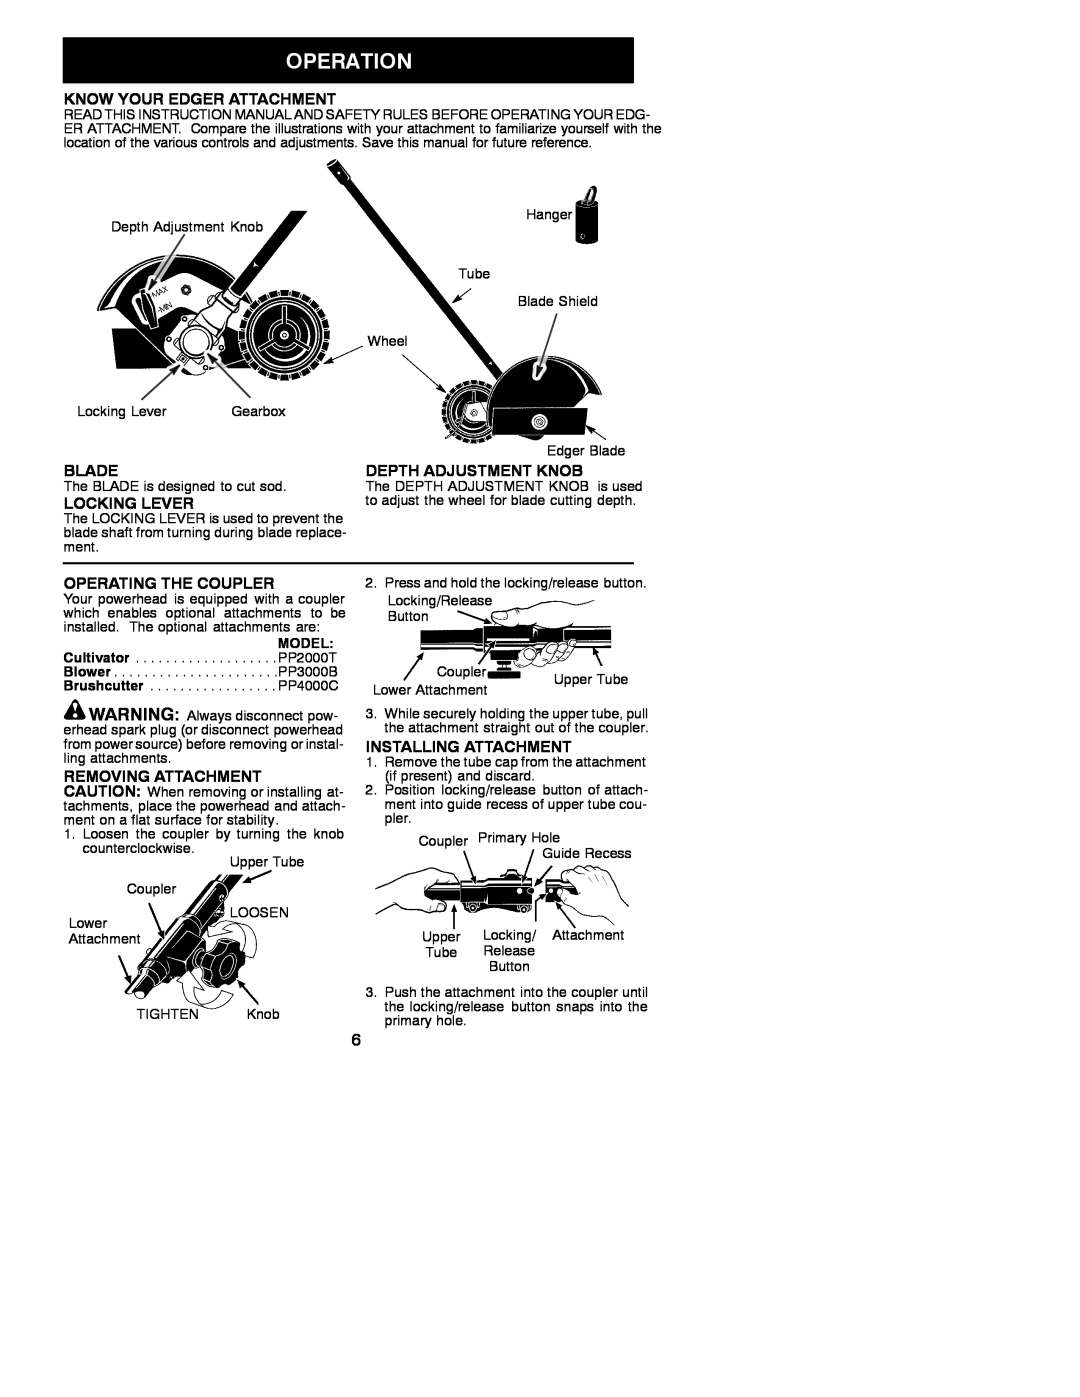 Poulan 1000E Know Your Edger Attachment, Blade, Depth Adjustment Knob, Locking Lever, Operating The Coupler 